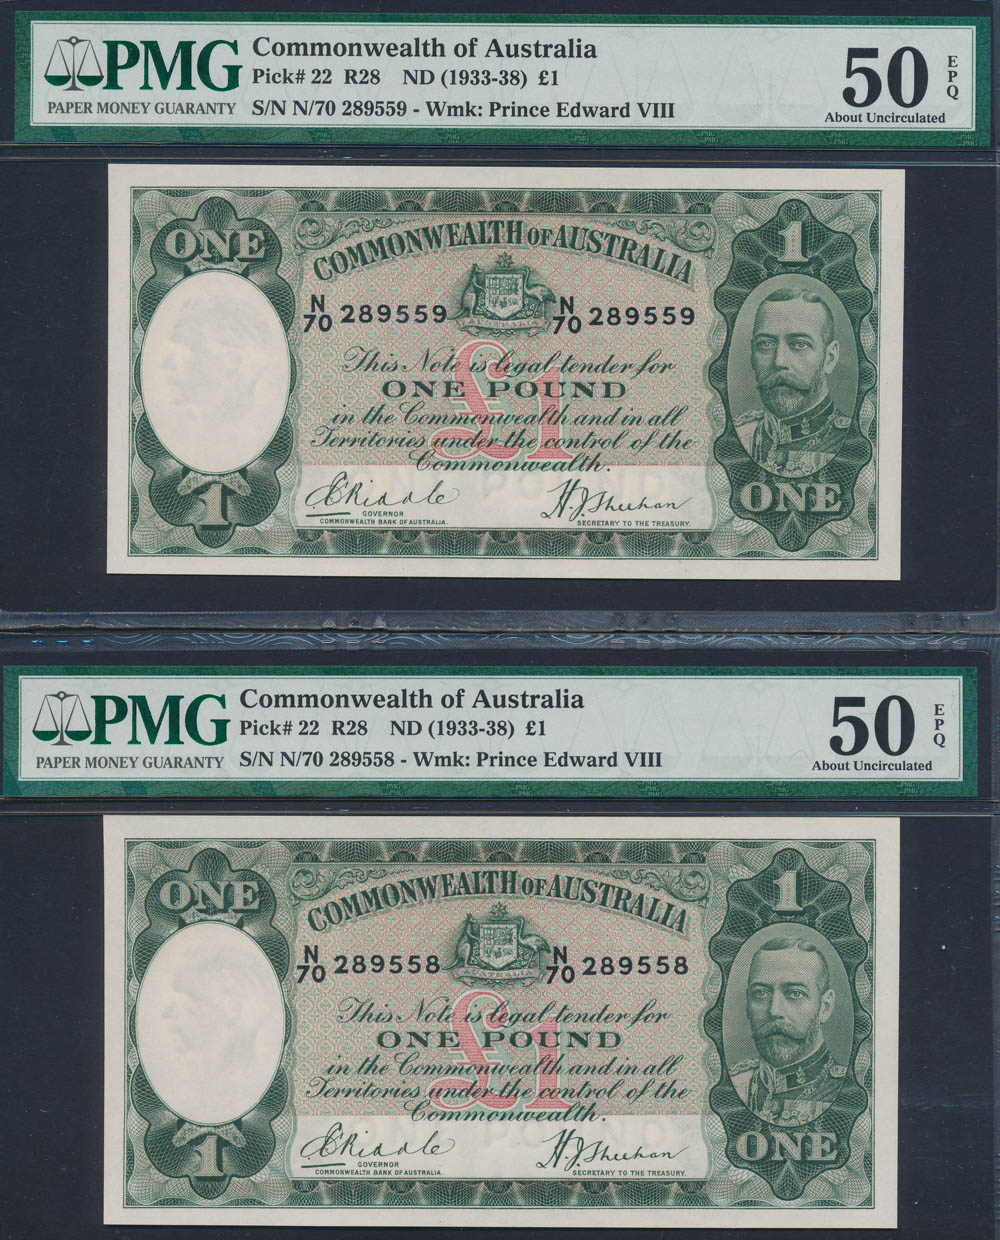 AUSTRALIA £1 Riddle-Sheehan 1 Ranking TOP5 Pound pr 50. Max 44% OFF PMG Graded UNC About